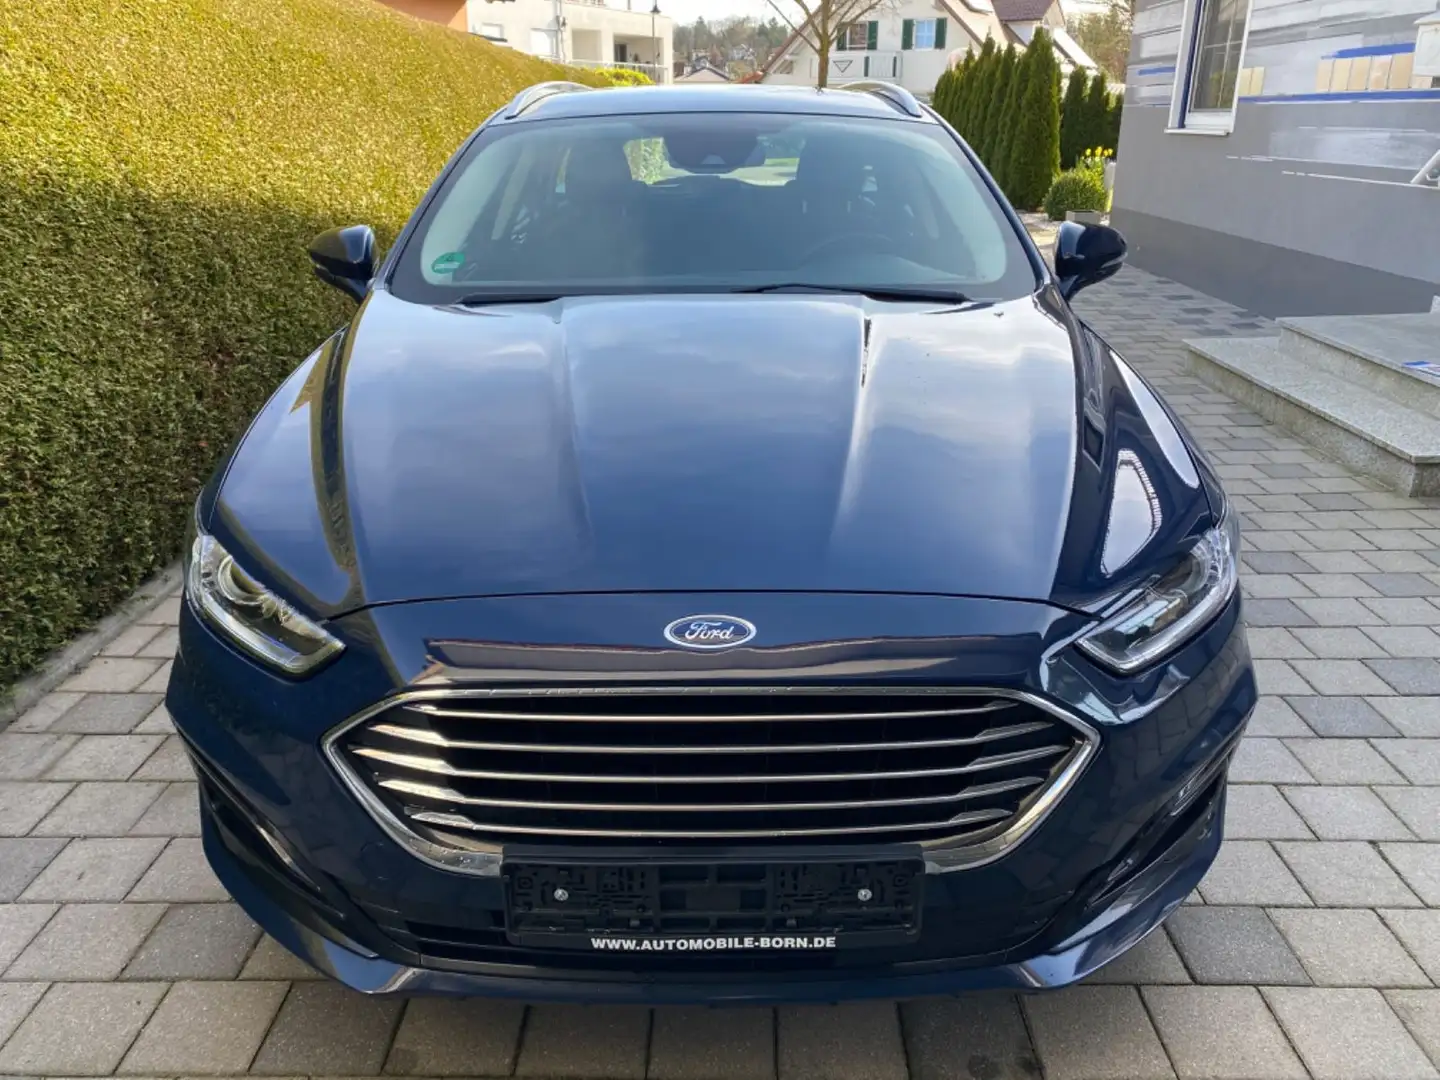 Ford Mondeo 2,0 TDCi 110kW ACC Business Turnier Blue - 2